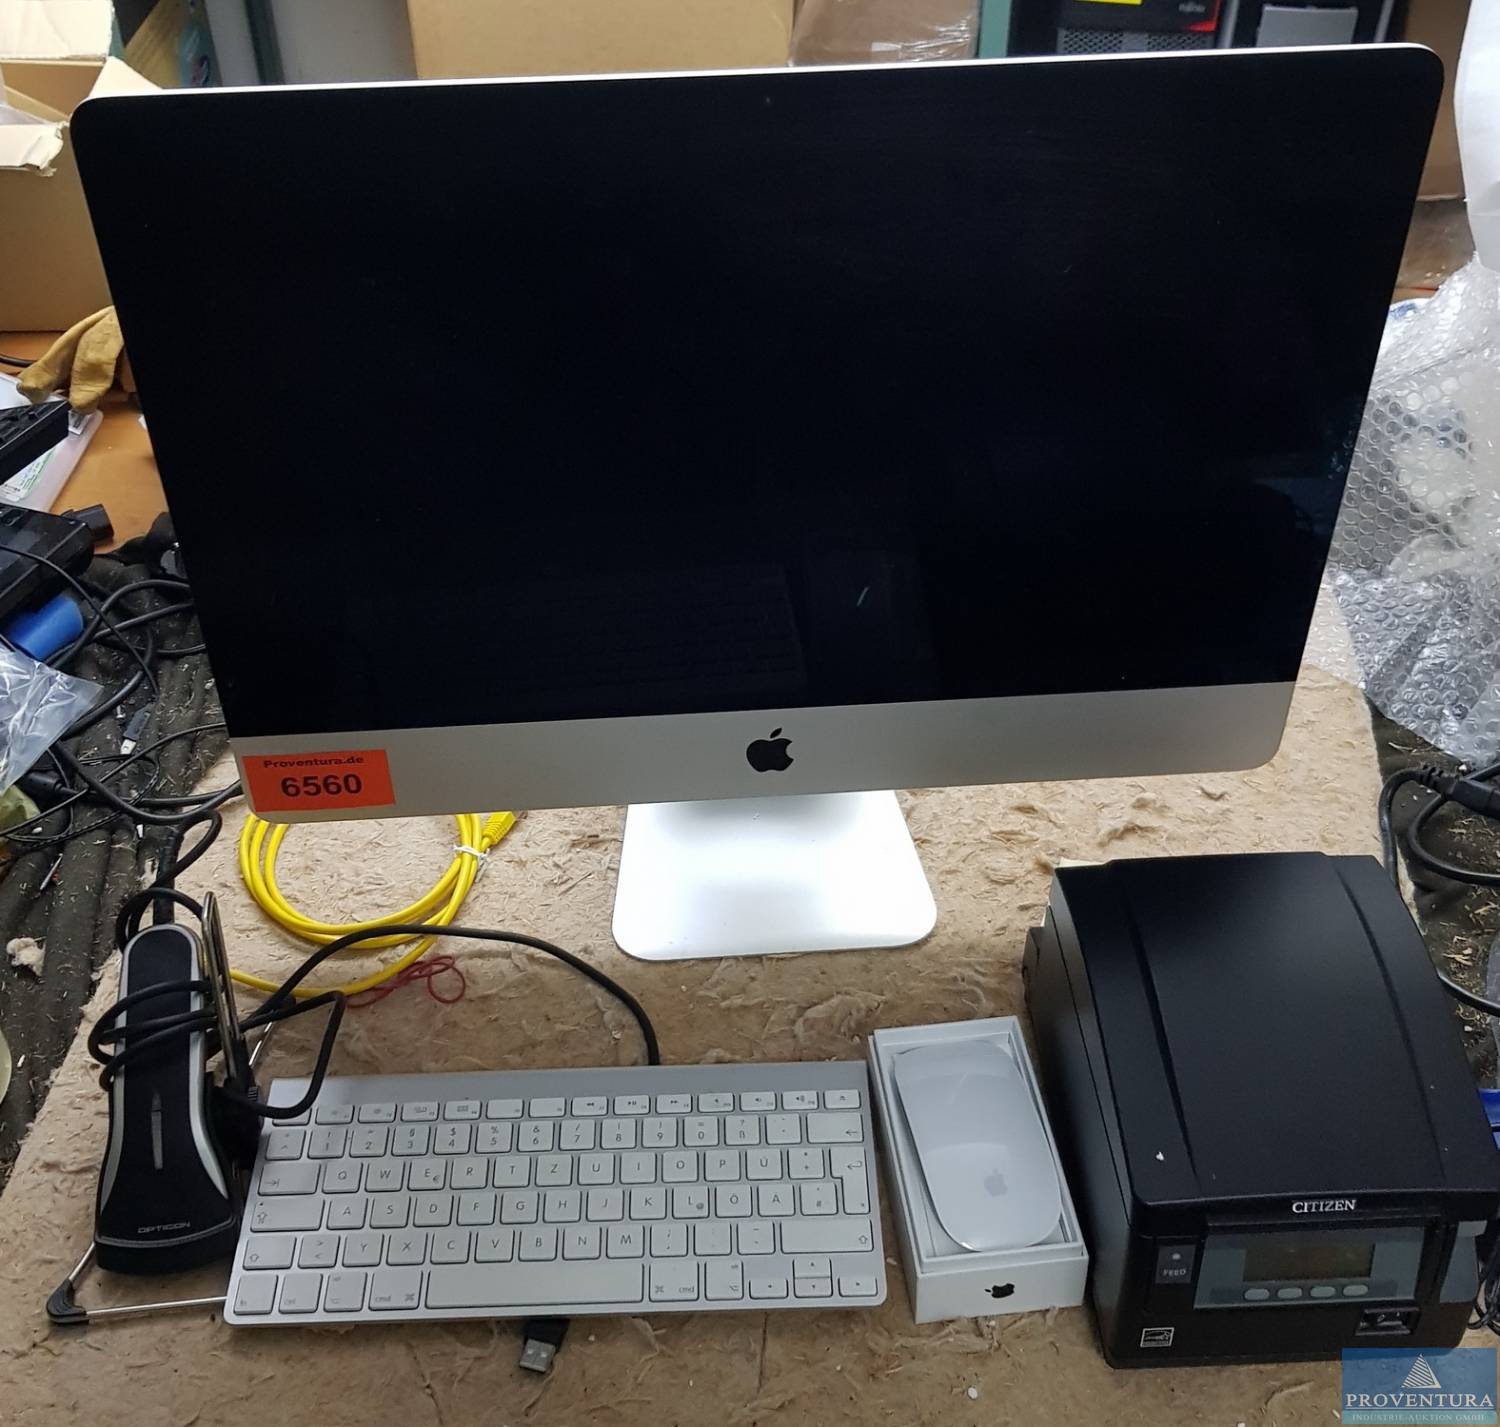 All In One Pc Apple Imac 21 Zoll Proventura Online Auktion